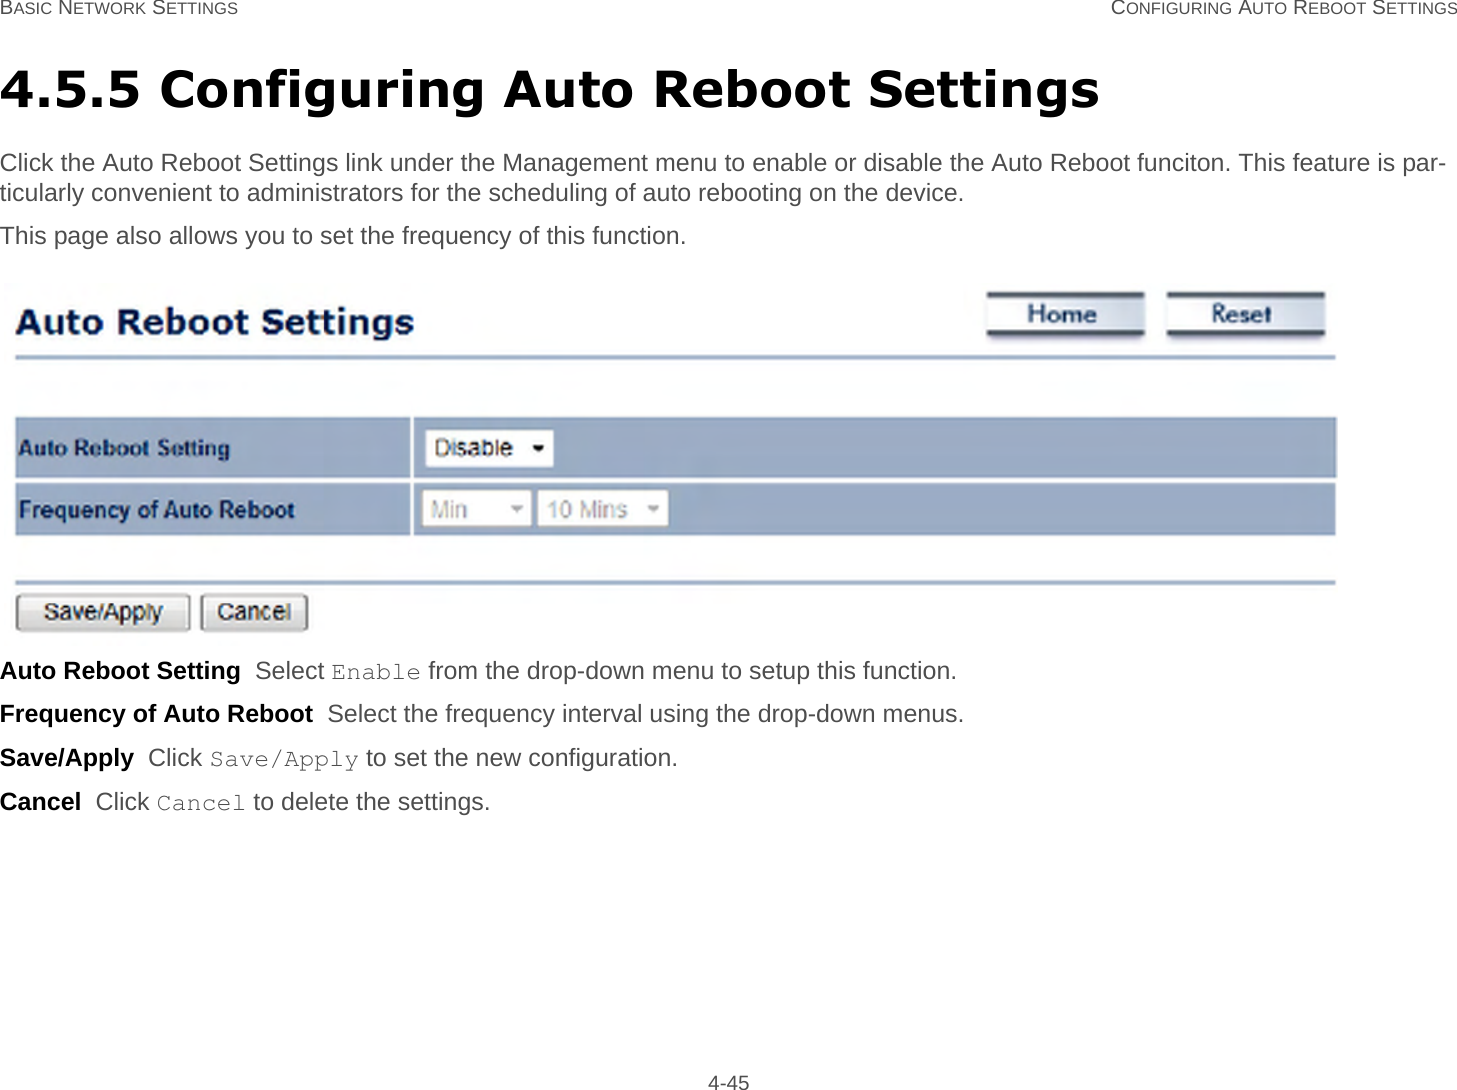 BASIC NETWORK SETTINGS CONFIGURING AUTO REBOOT SETTINGS 4-454.5.5 Configuring Auto Reboot SettingsClick the Auto Reboot Settings link under the Management menu to enable or disable the Auto Reboot funciton. This feature is par-ticularly convenient to administrators for the scheduling of auto rebooting on the device.This page also allows you to set the frequency of this function.Auto Reboot Setting  Select Enable from the drop-down menu to setup this function.Frequency of Auto Reboot  Select the frequency interval using the drop-down menus.Save/Apply  Click Save/Apply to set the new configuration.Cancel  Click Cancel to delete the settings.